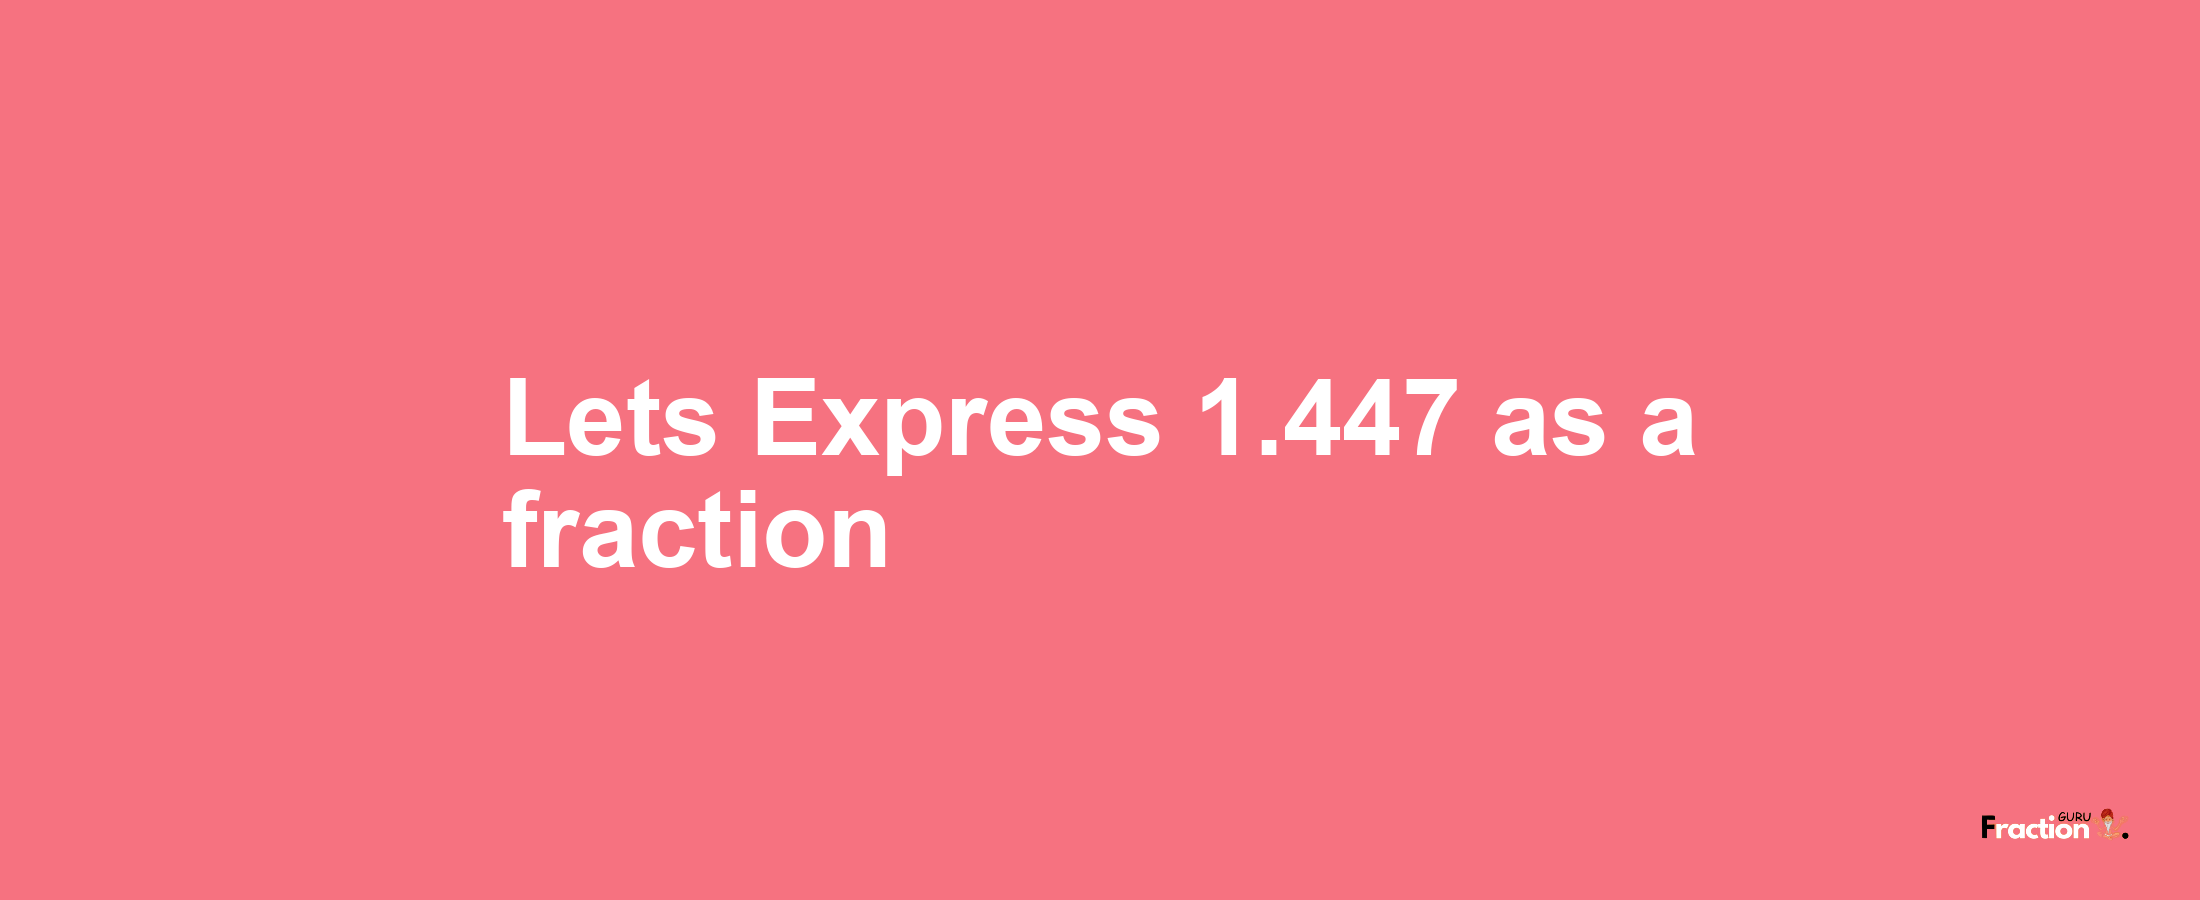 Lets Express 1.447 as afraction